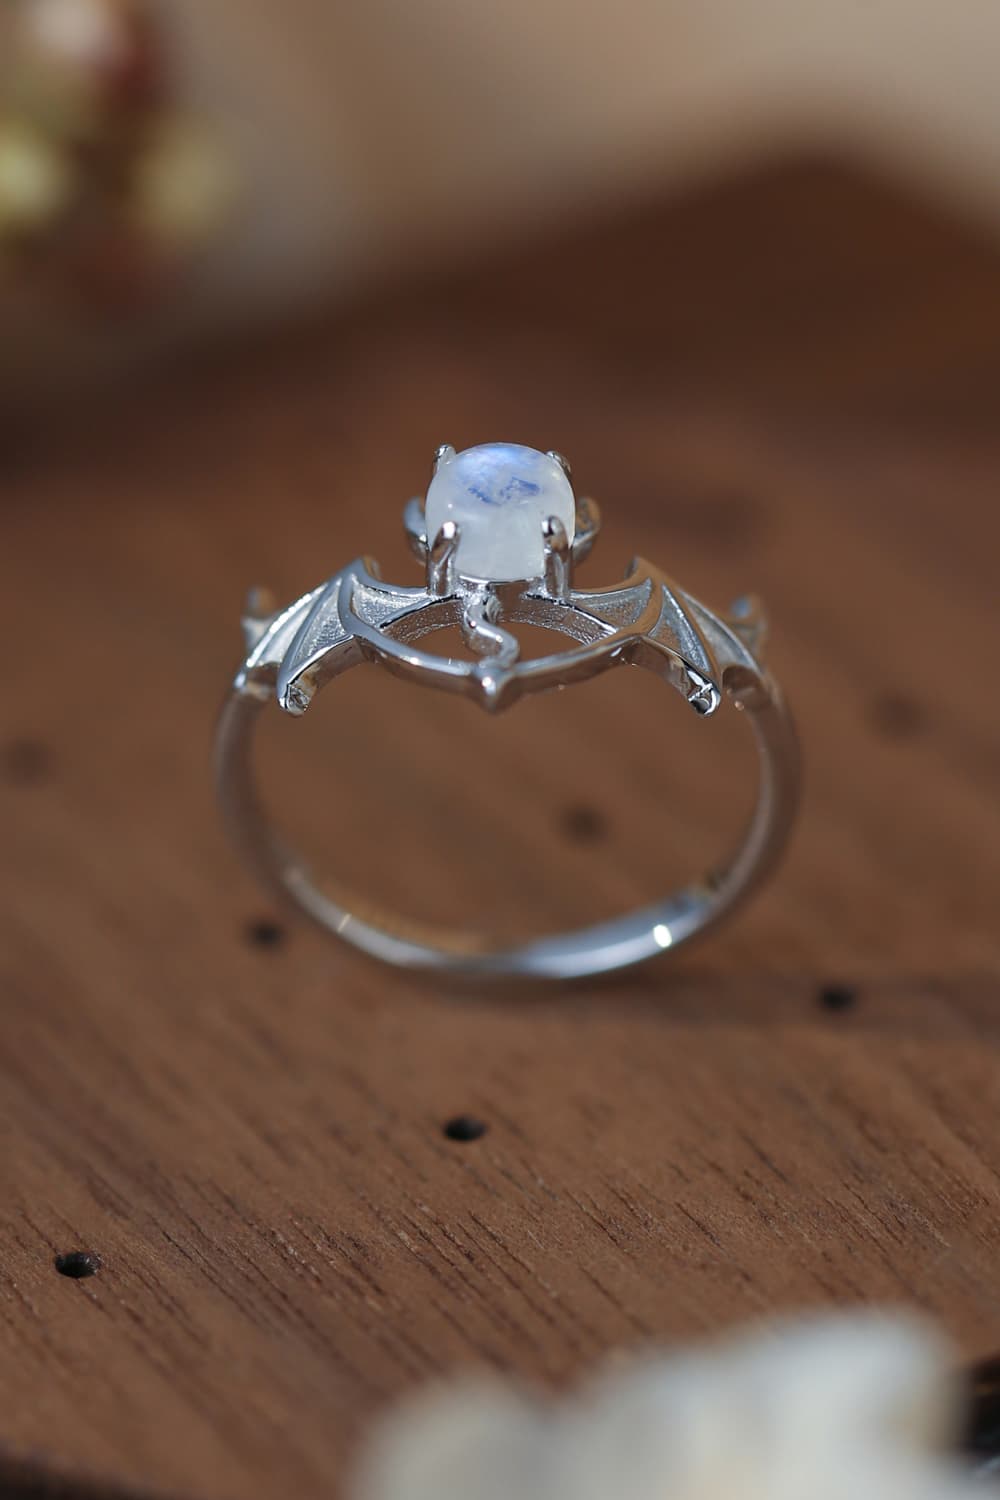 Moonstone Bat 925 Sterling Silver Ring BLUE ZONE PLANET